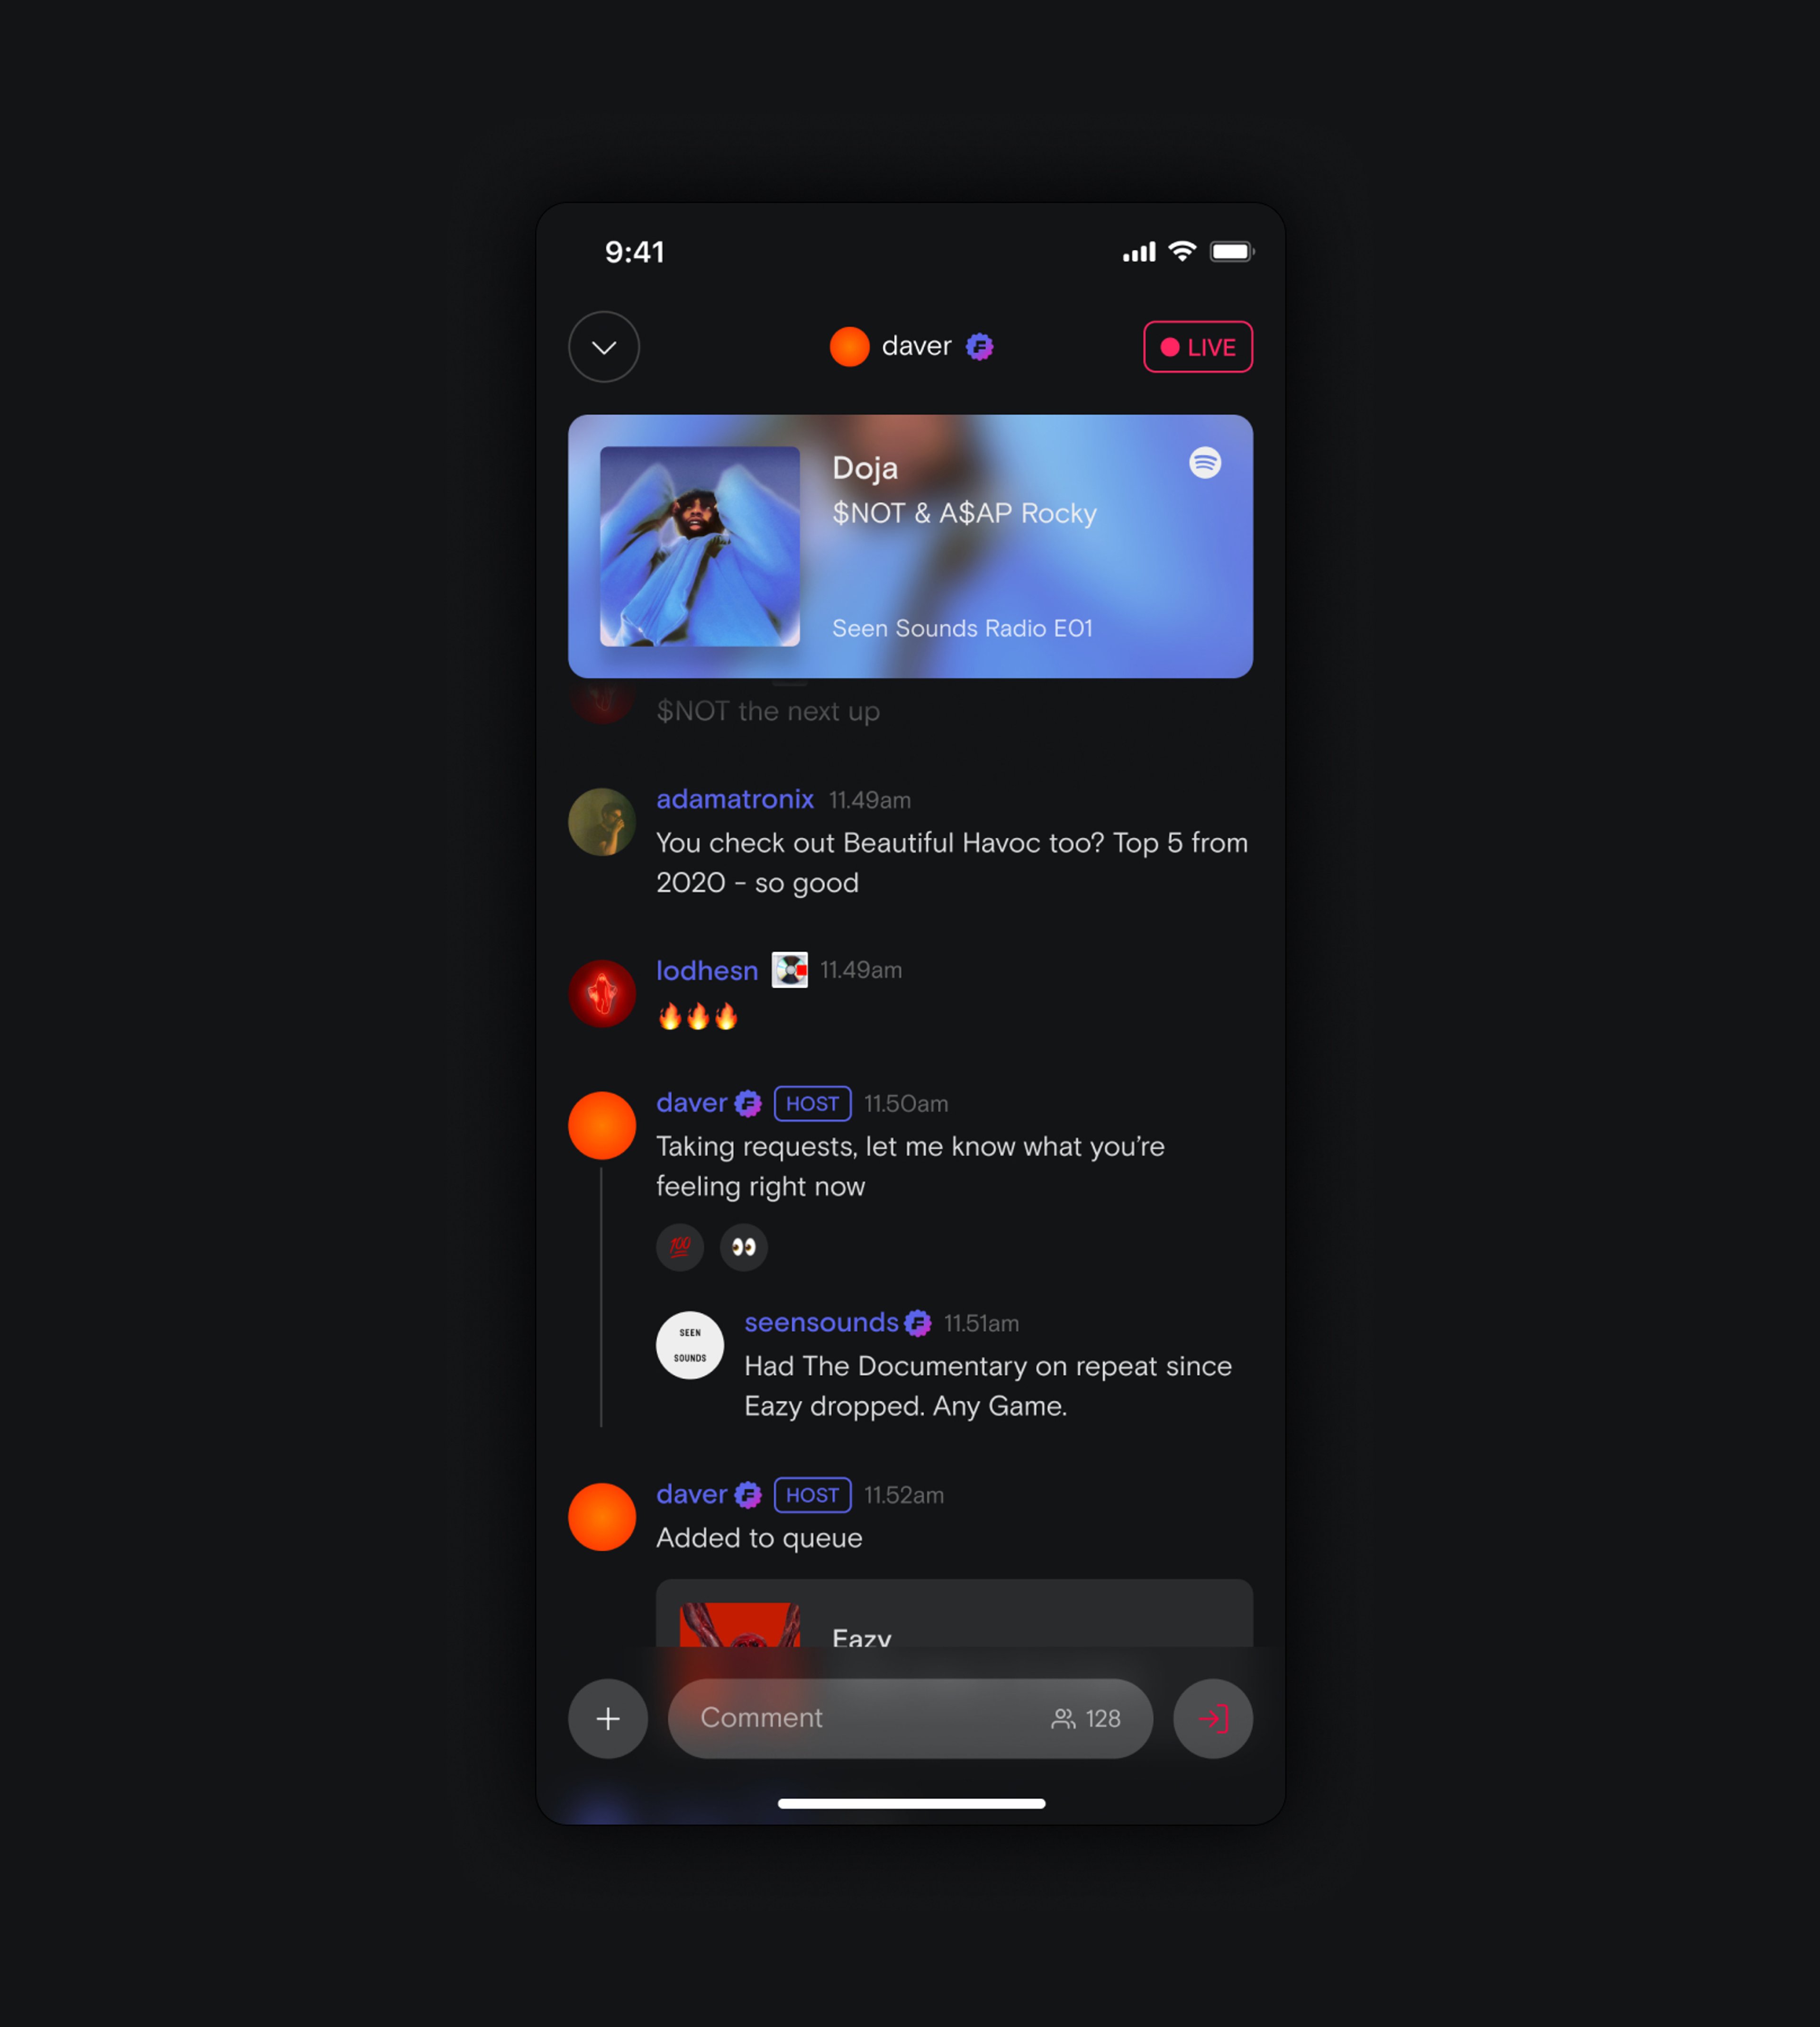 Screenshot of the live streaming screen showing different comments from users reacting to the live show